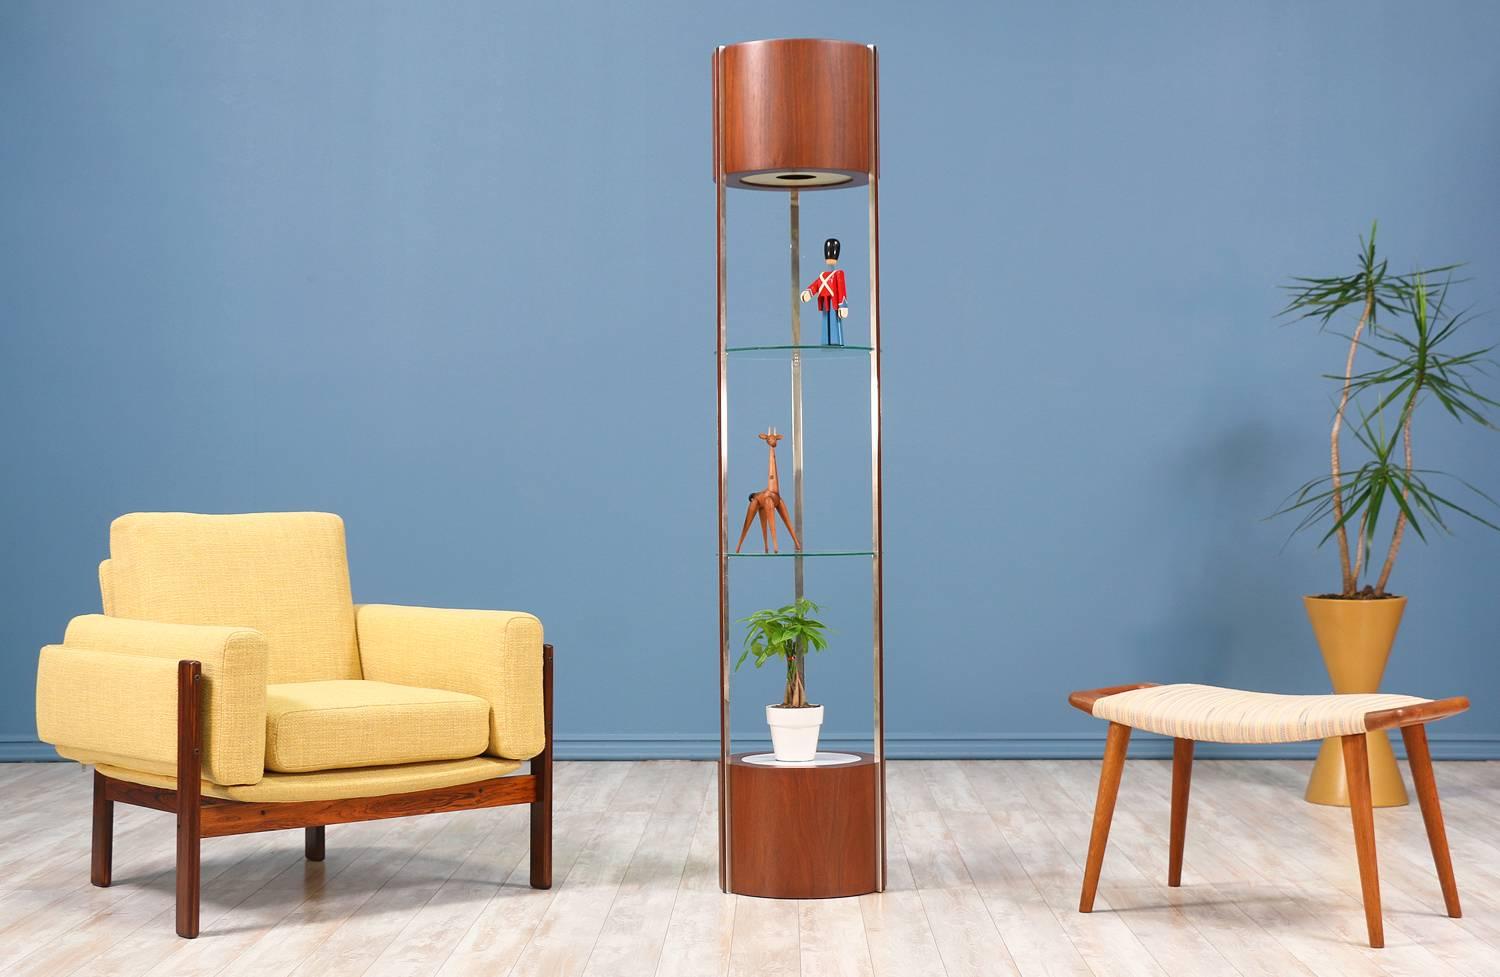 Mid-Century Modern curio cabinet manufactured in the United States circa 1960’s. This cylindrical display case features a solid walnut wood and steel body with plastic light diffusers at the top and bottom for illuminating your collection of